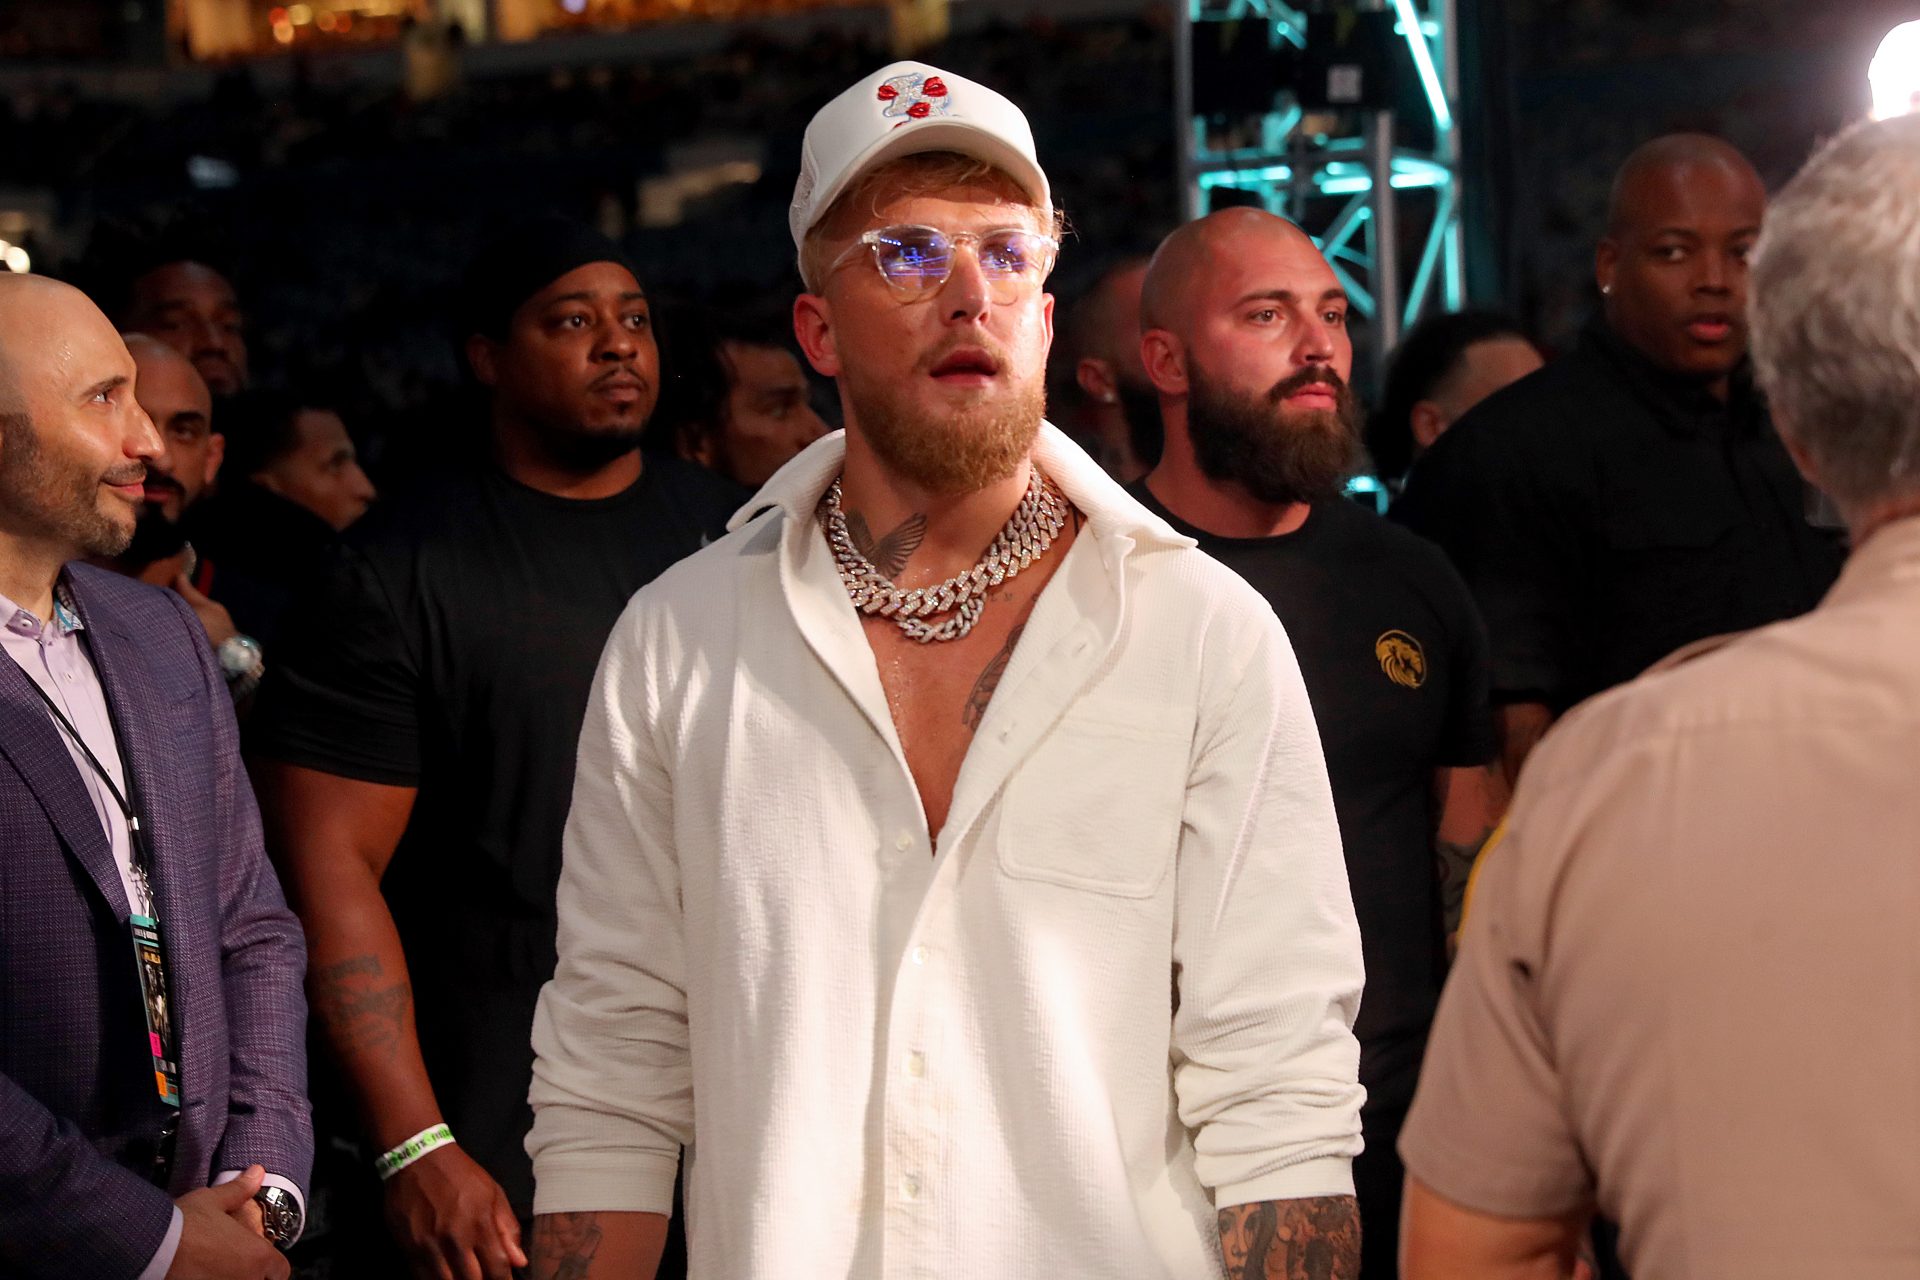 Video: Jake Paul Reveals off $100K ‘Sleepy’ Conor McGregor Chain Depicting Knockout